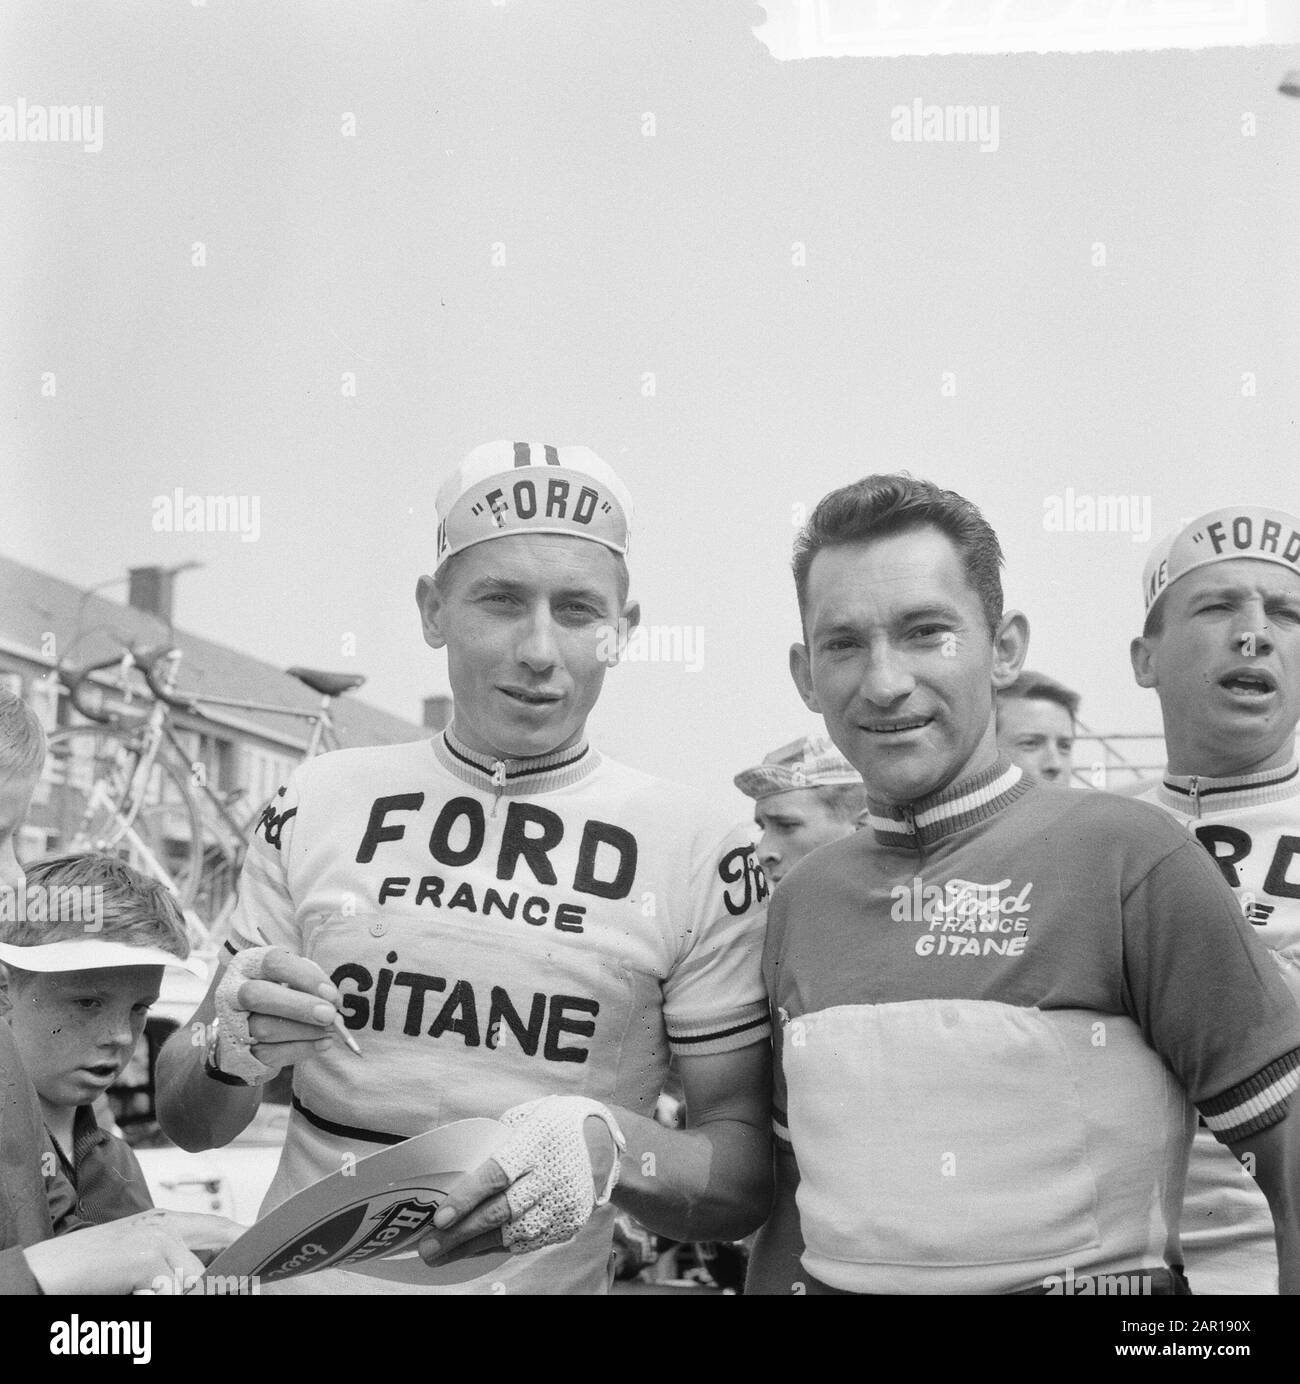 Tour of the Netherlands, start at Amstelveen, Jacques Anquet (kop) Date: May 12, 1965 Location: Amstelveen, Noord-Holland Keywords: START, laps, cycling Personal name: Jacques Anquetil Stock Photo